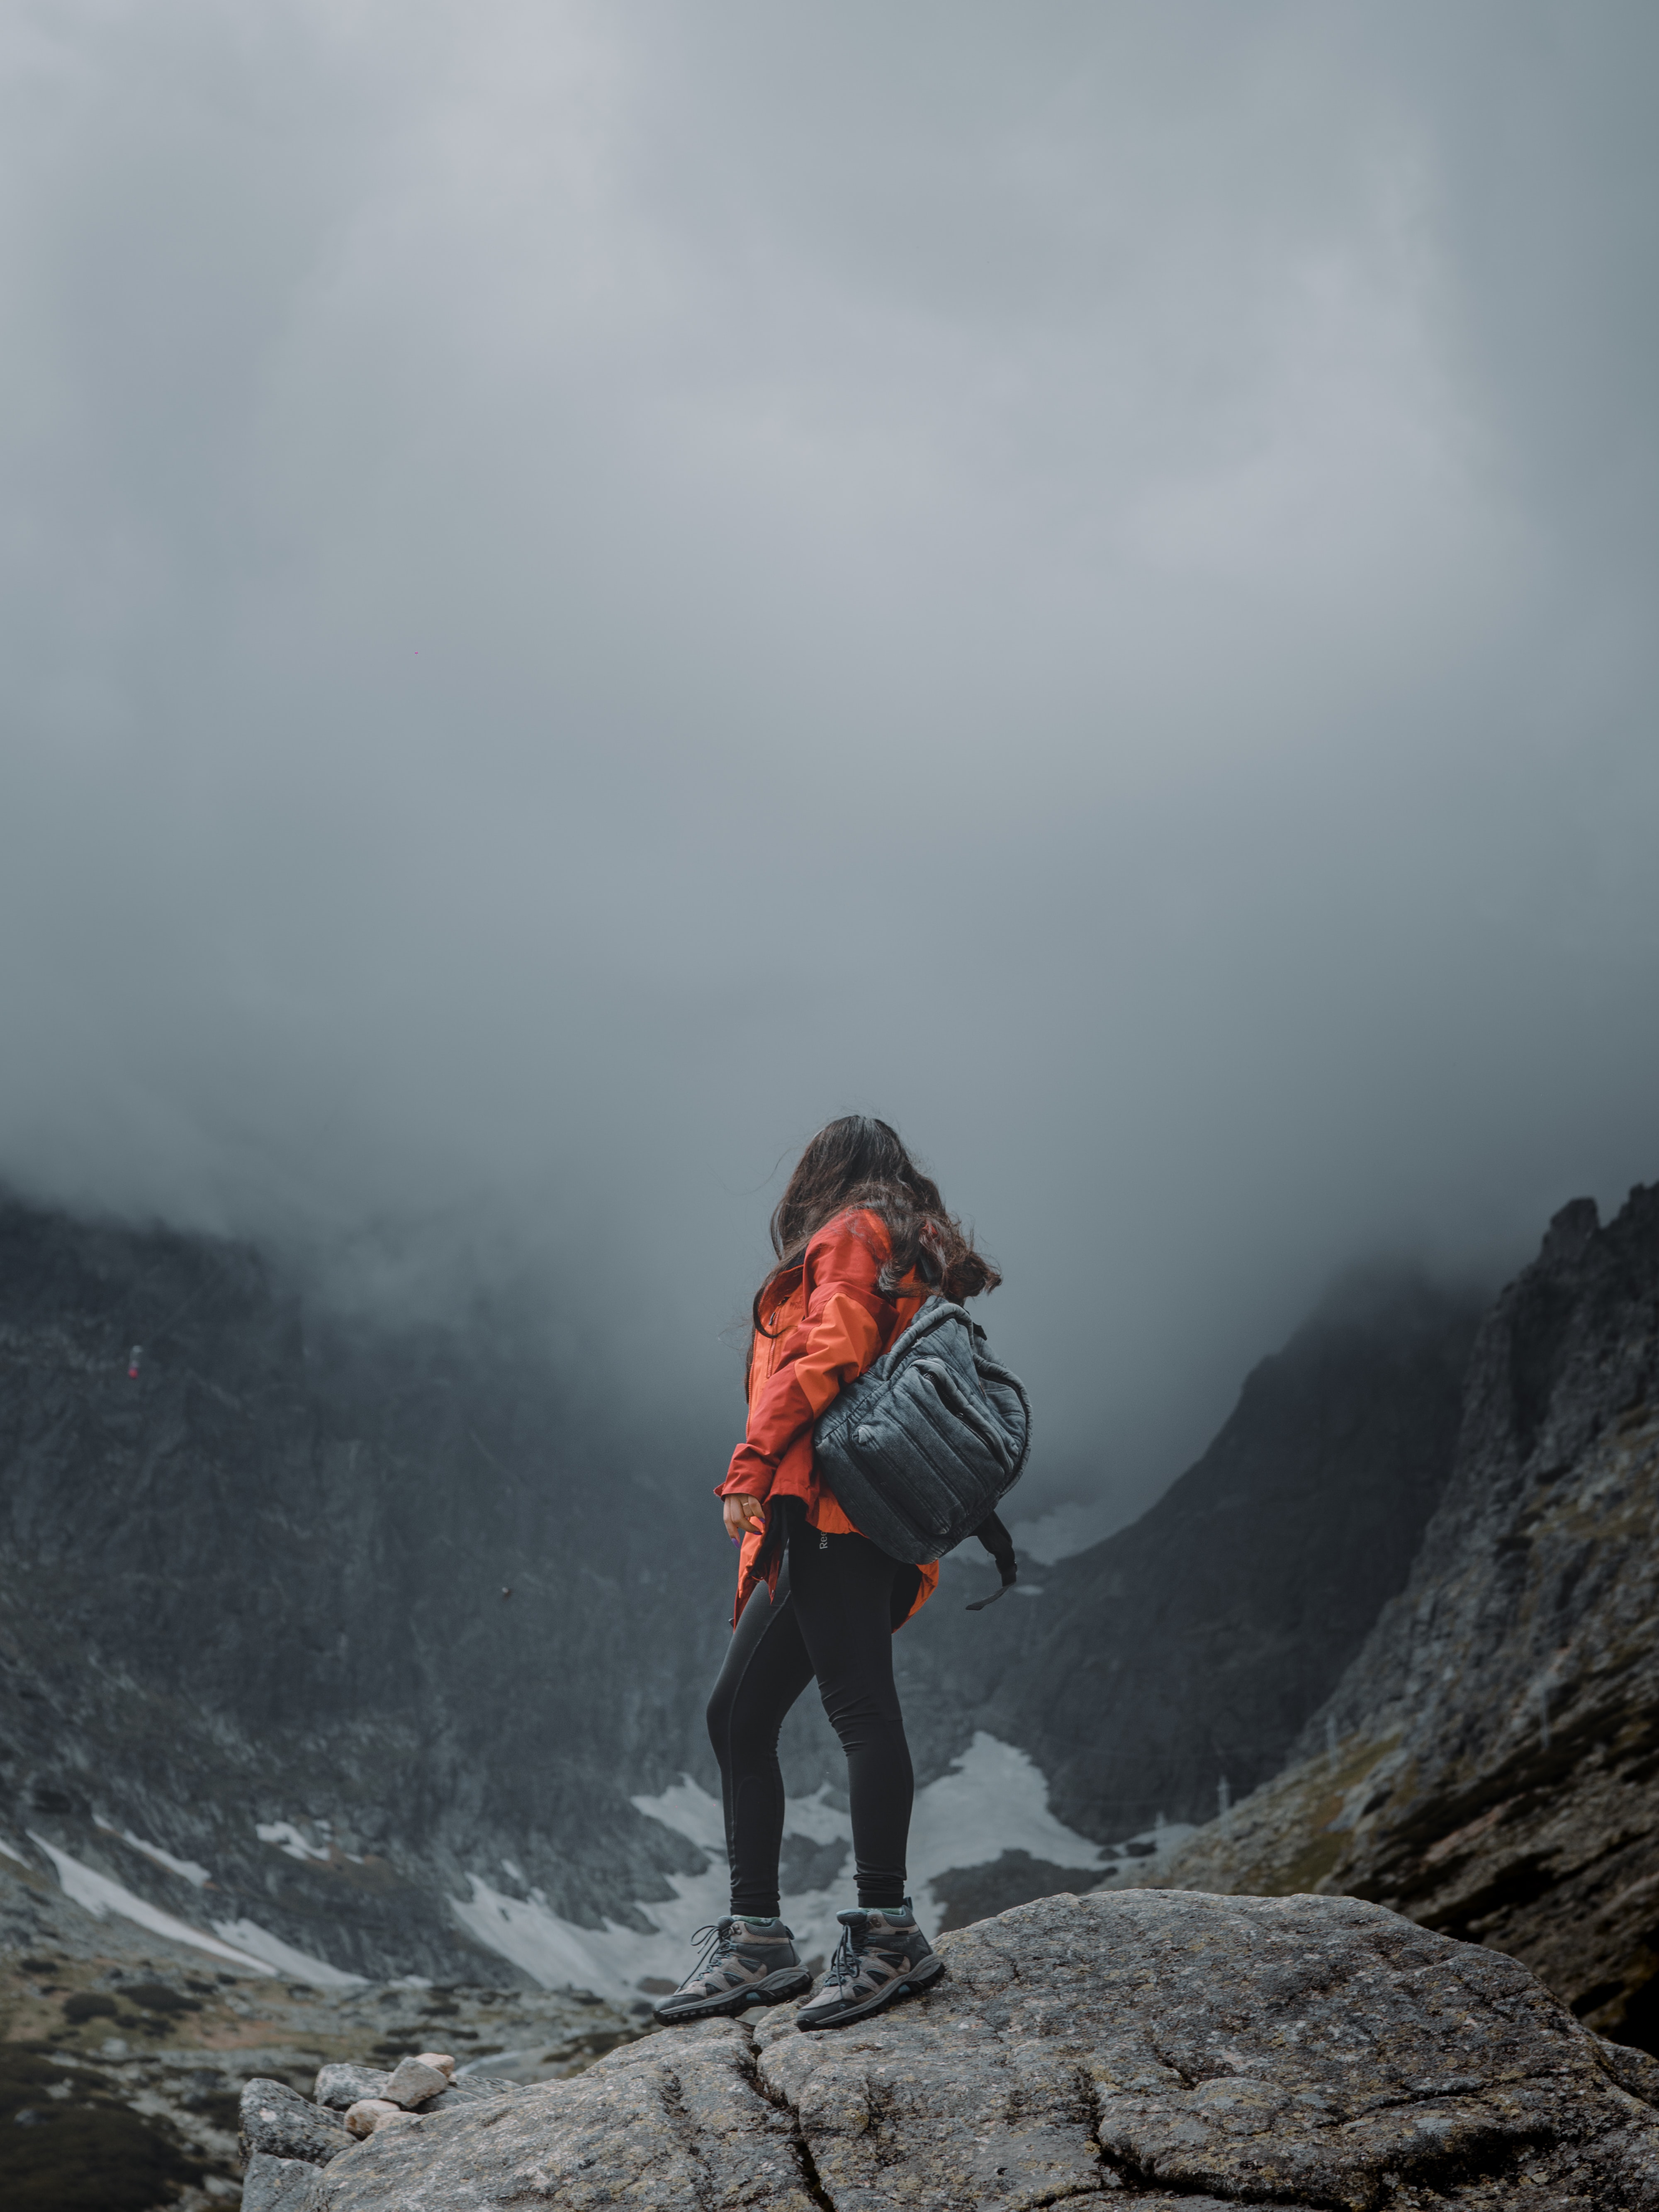 alone, girl, loneliness, fog, journey, rocks, miscellanea, miscellaneous, lonely, backpack, rucksack UHD